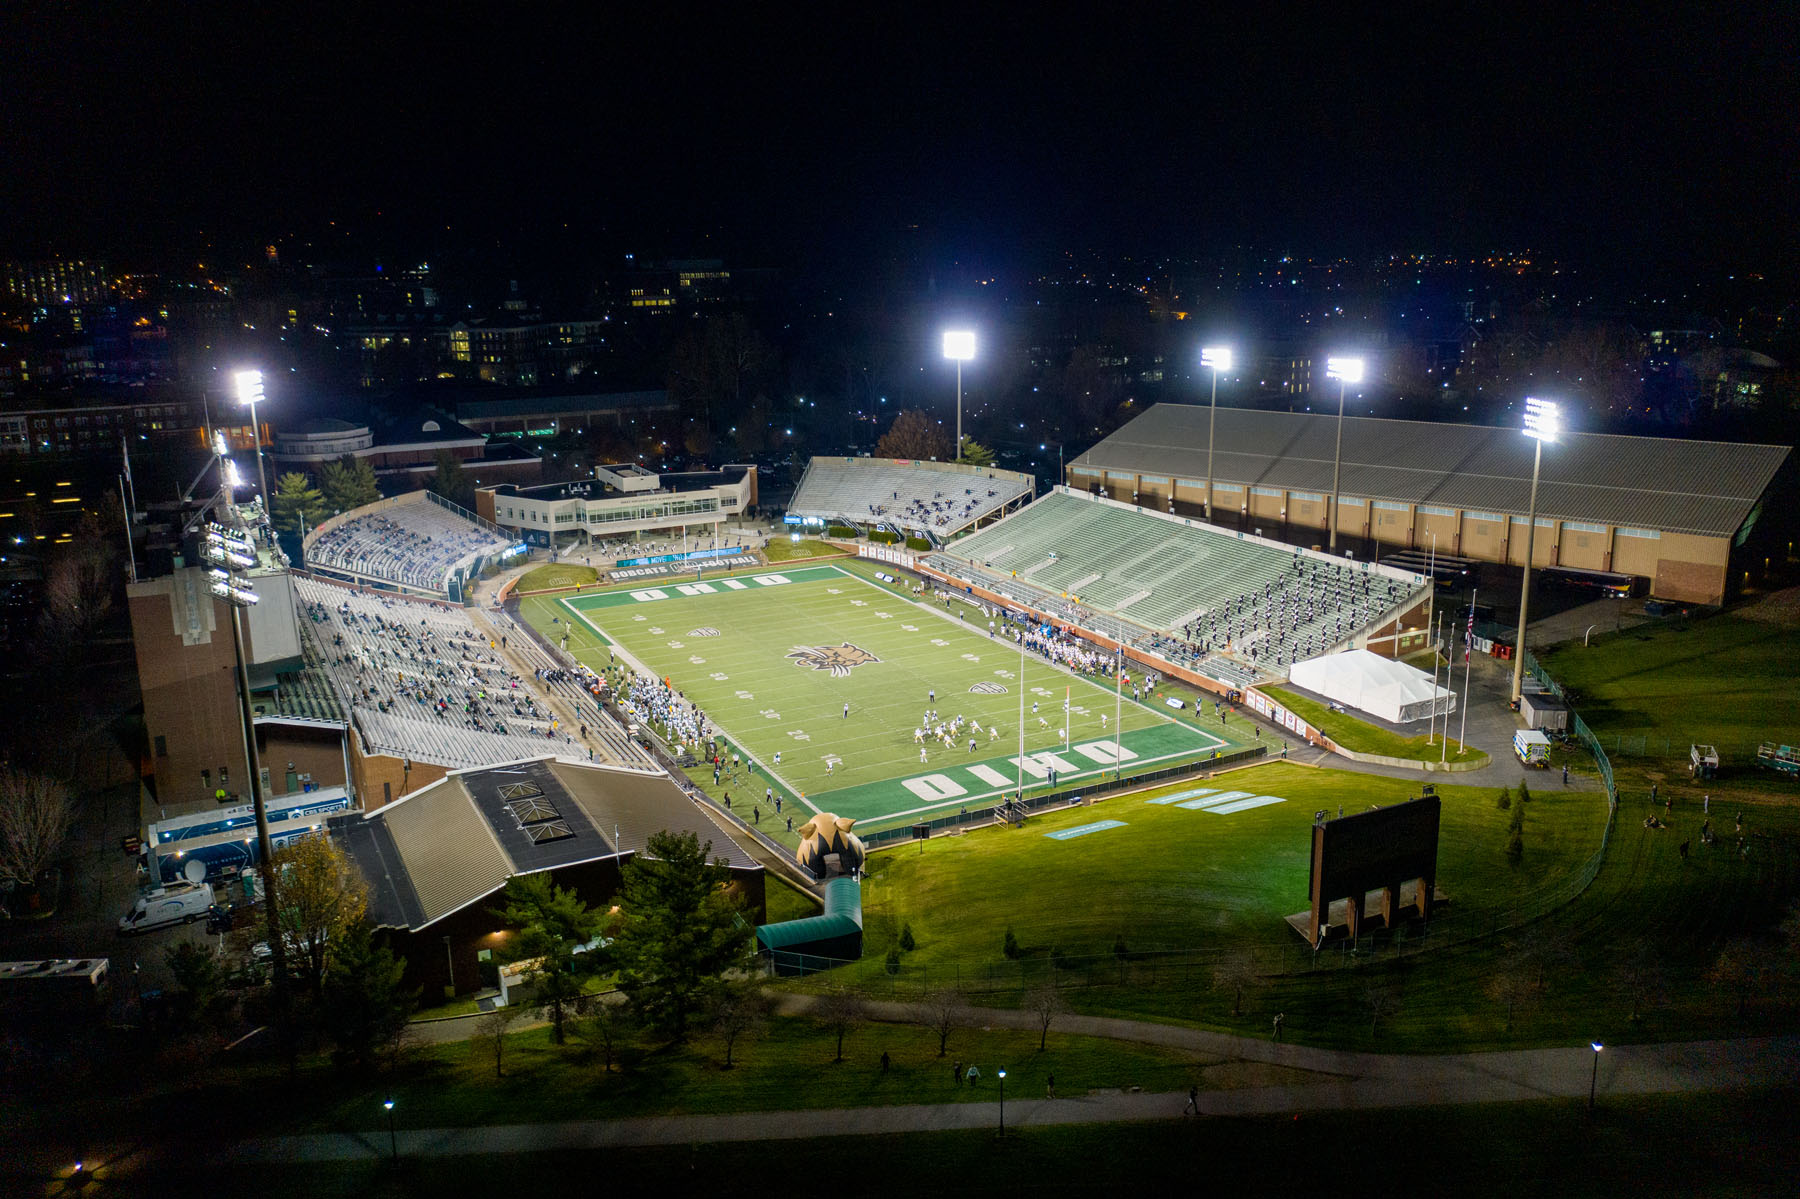 An overhead view of Peden Stadium at night. Less crowd density is visible as games in 2020 were restrictive